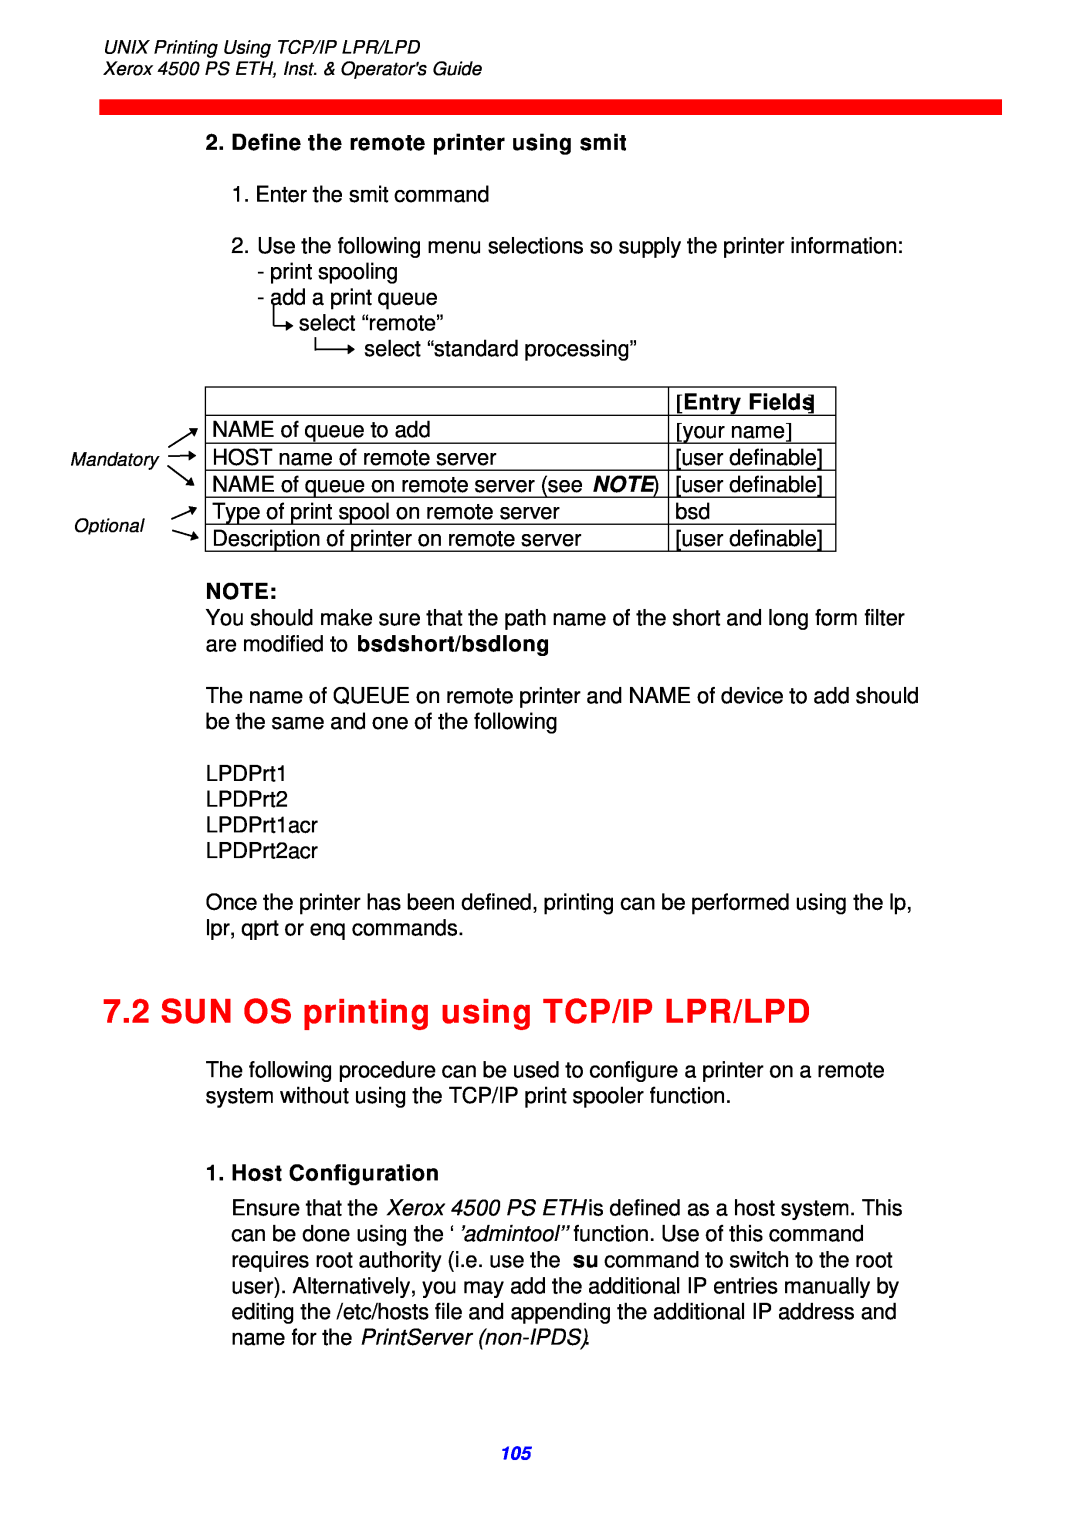 Xerox 4500 ps eth SUN OS printing using TCP/IP LPR/LPD, Define the remote printer using smit, Entry Fields 